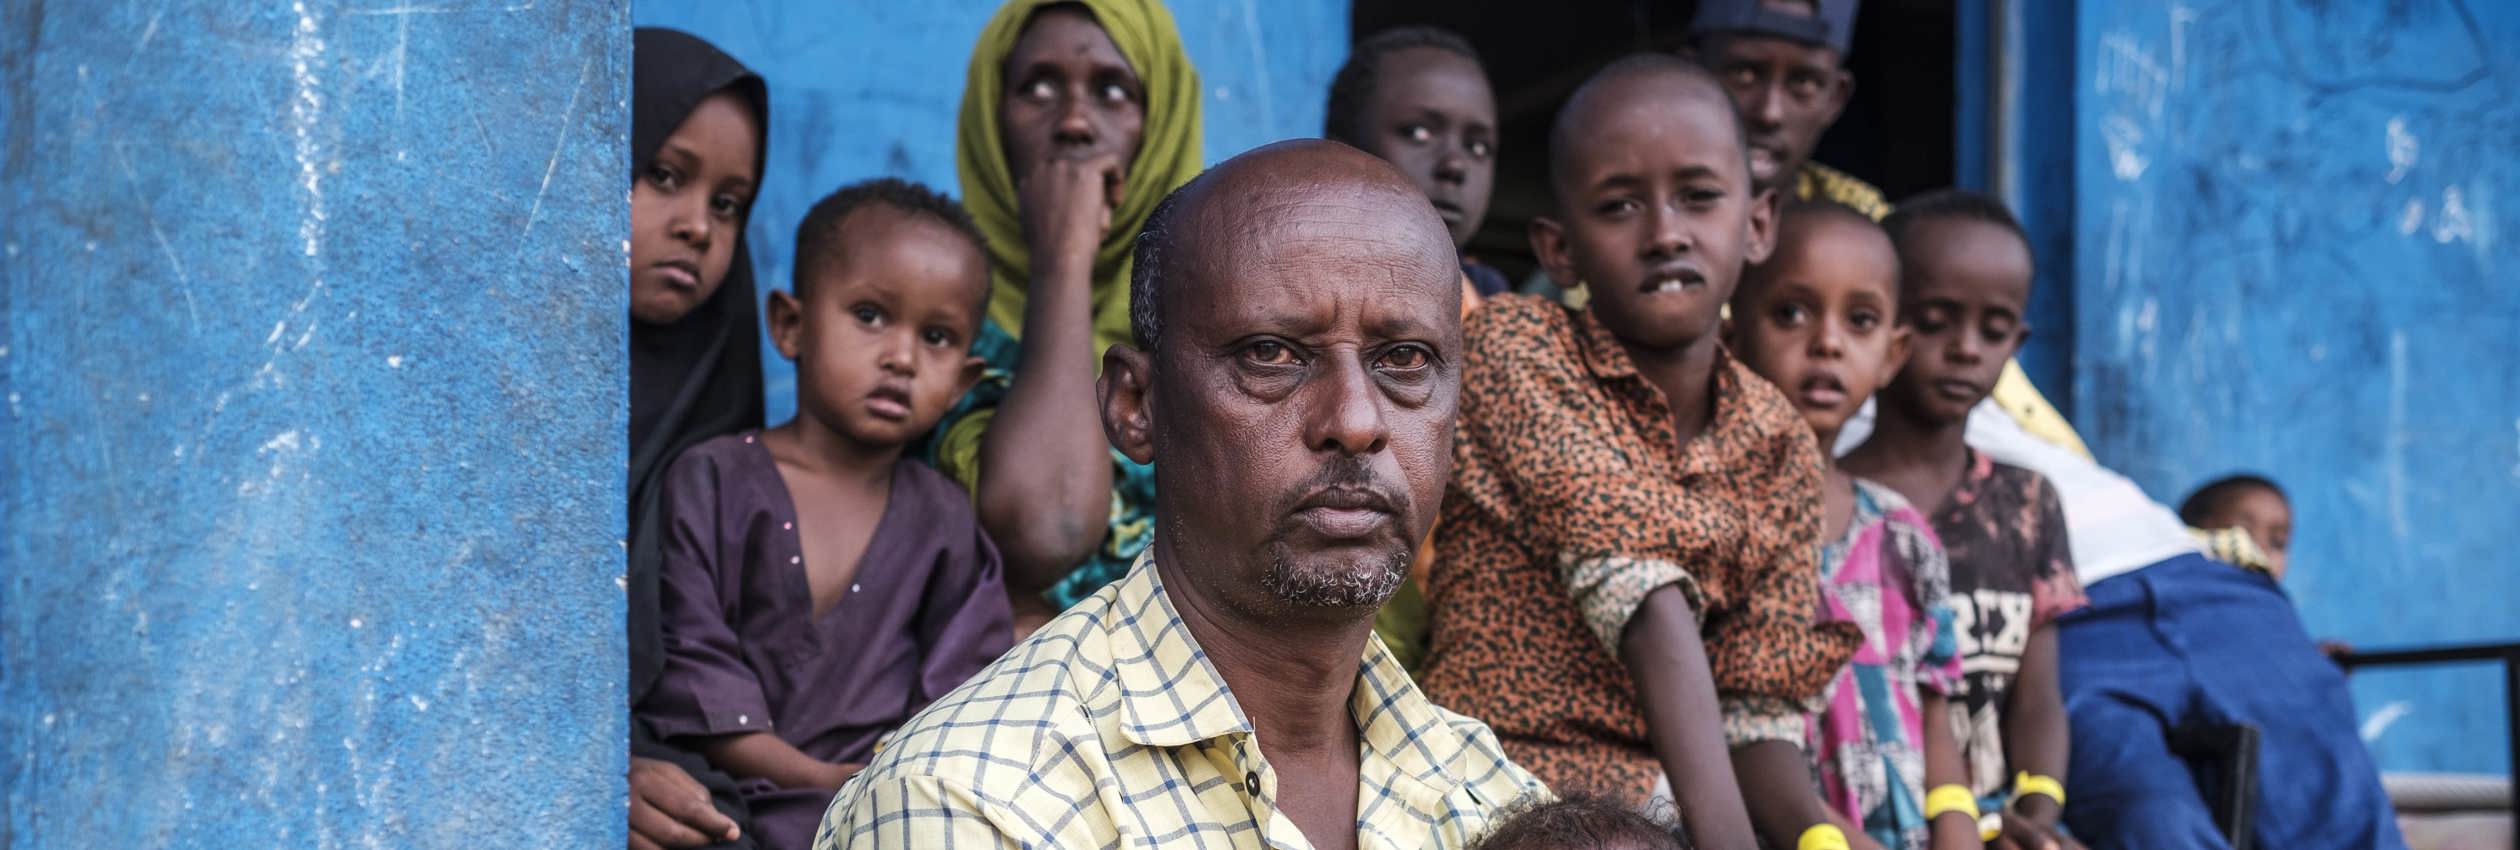 Shalle Hassan Abdirahman, a 53-year-old Somali refugee, was forced to flee his home with his family because of  worsening drought and violence from armed extremist group Al-Shabab.